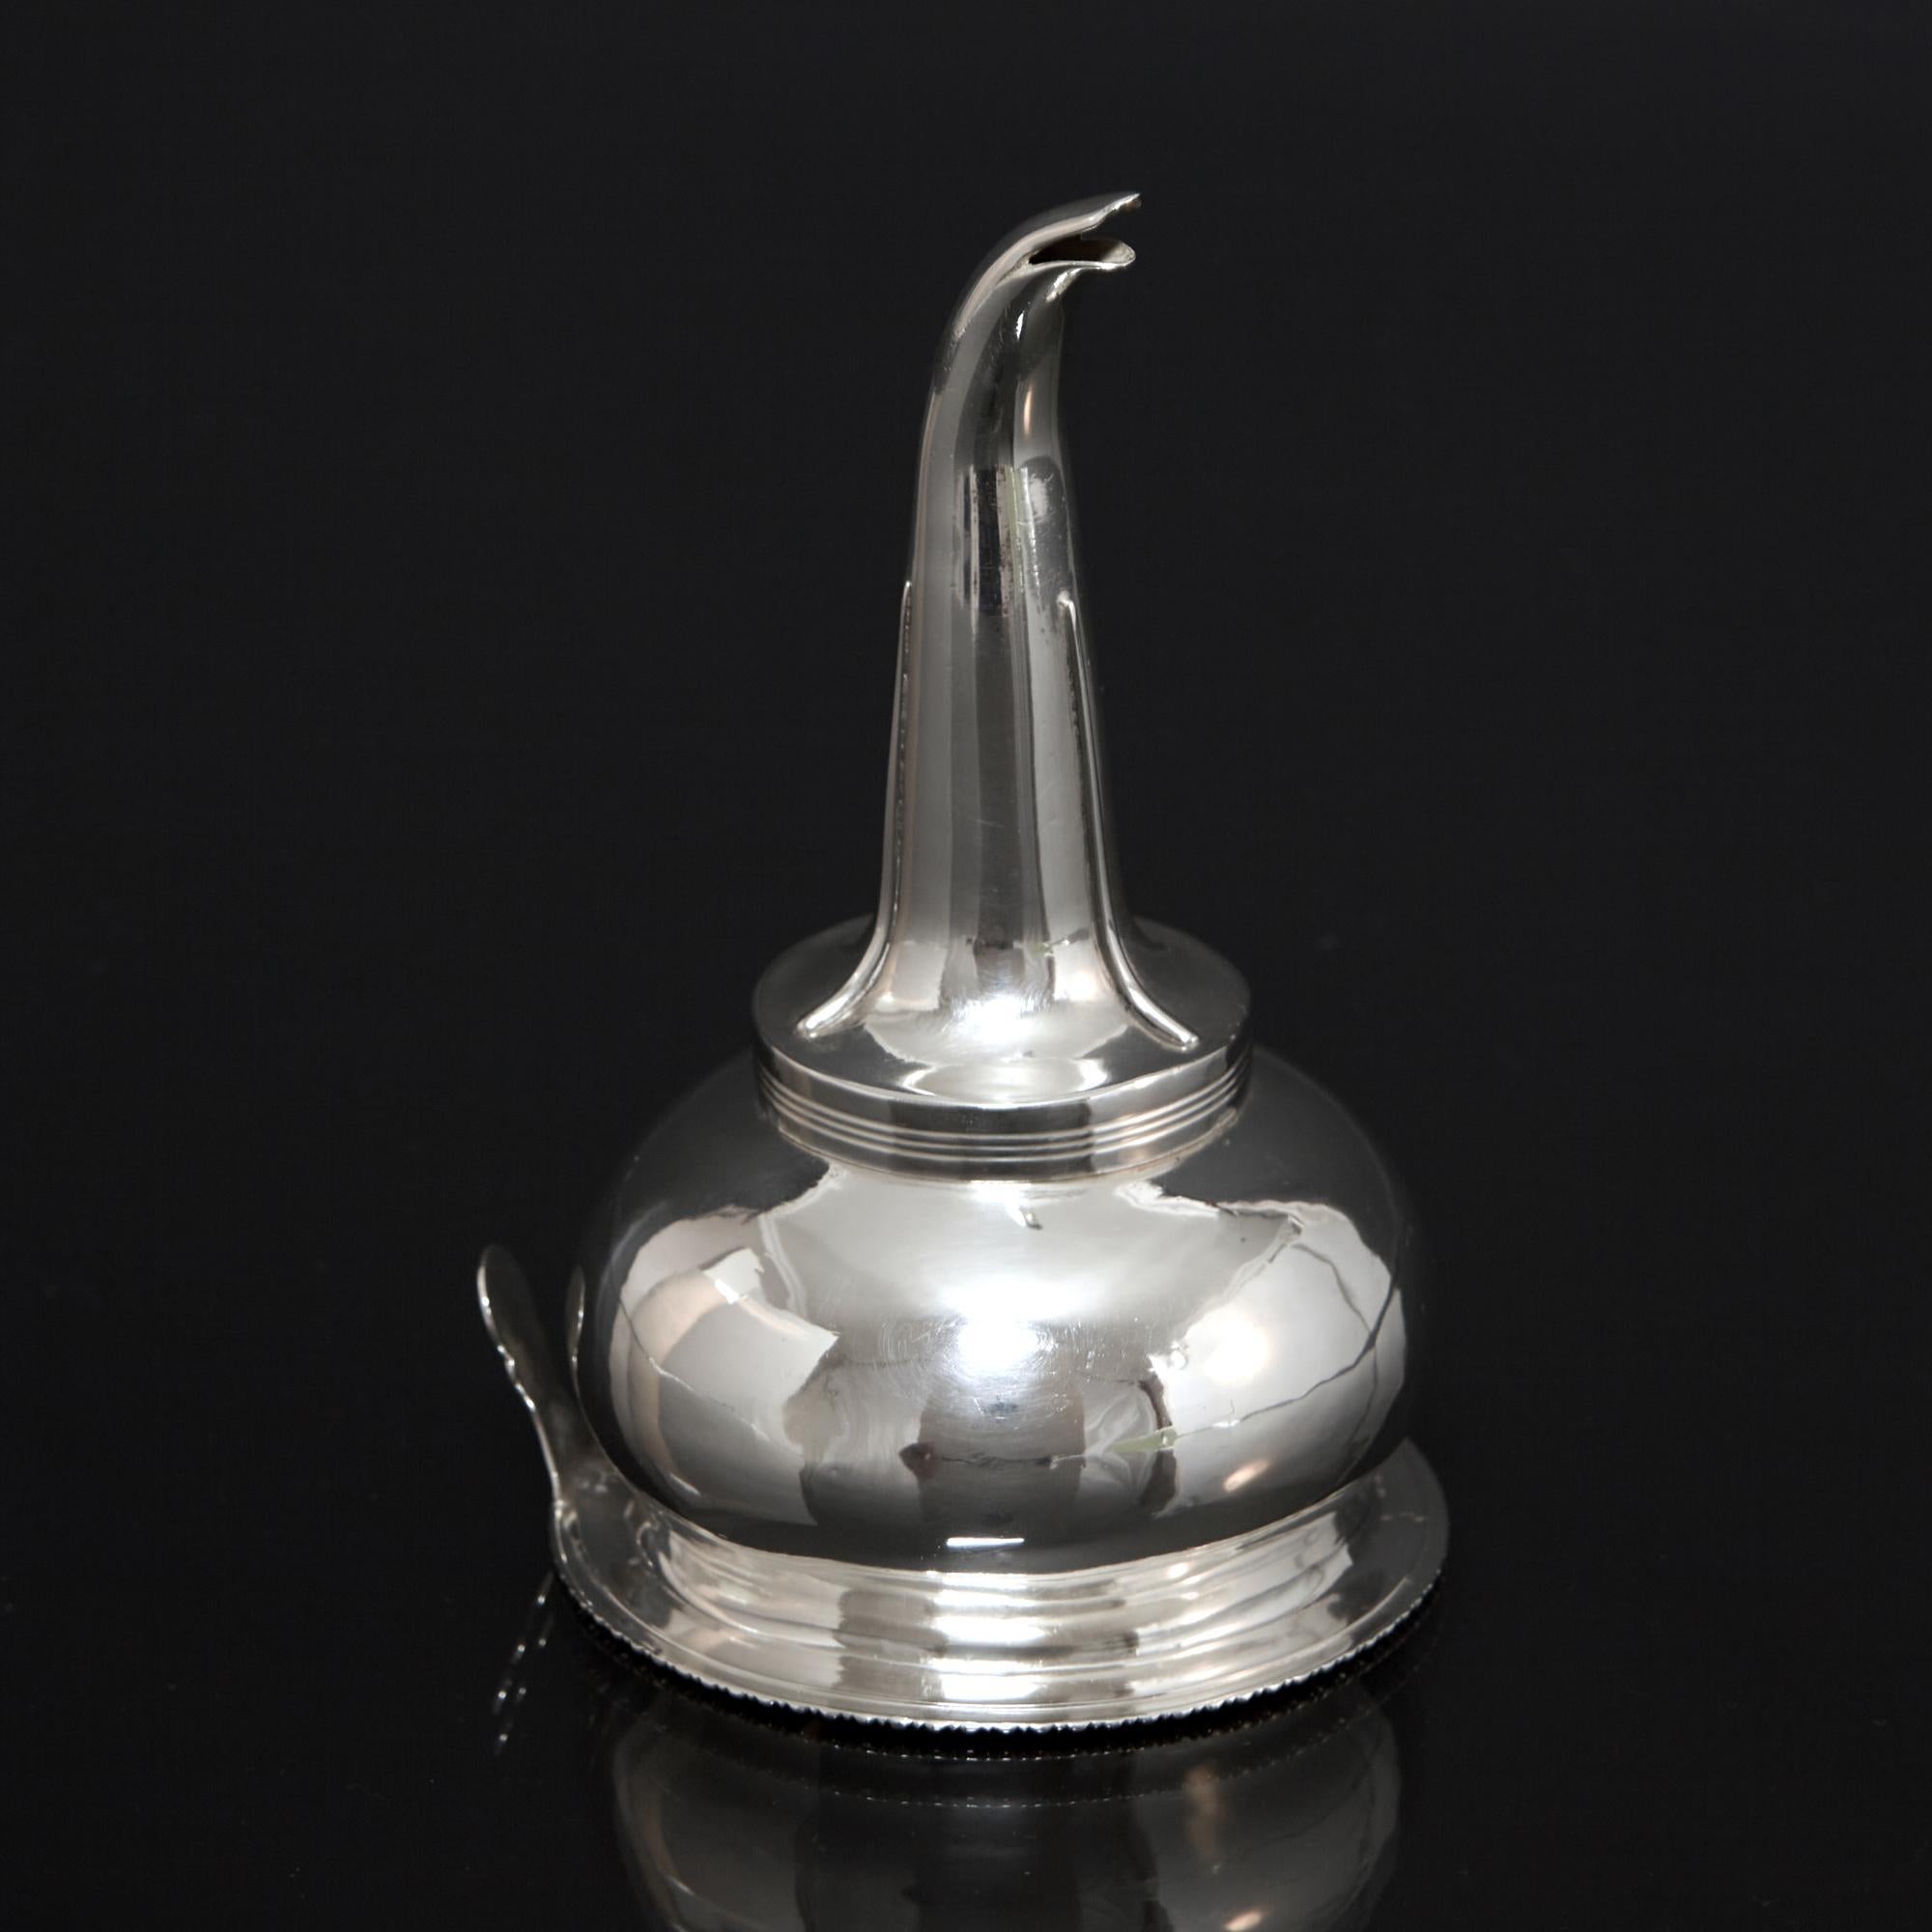 English Antique George IV Silver Wine Funnel, 1821